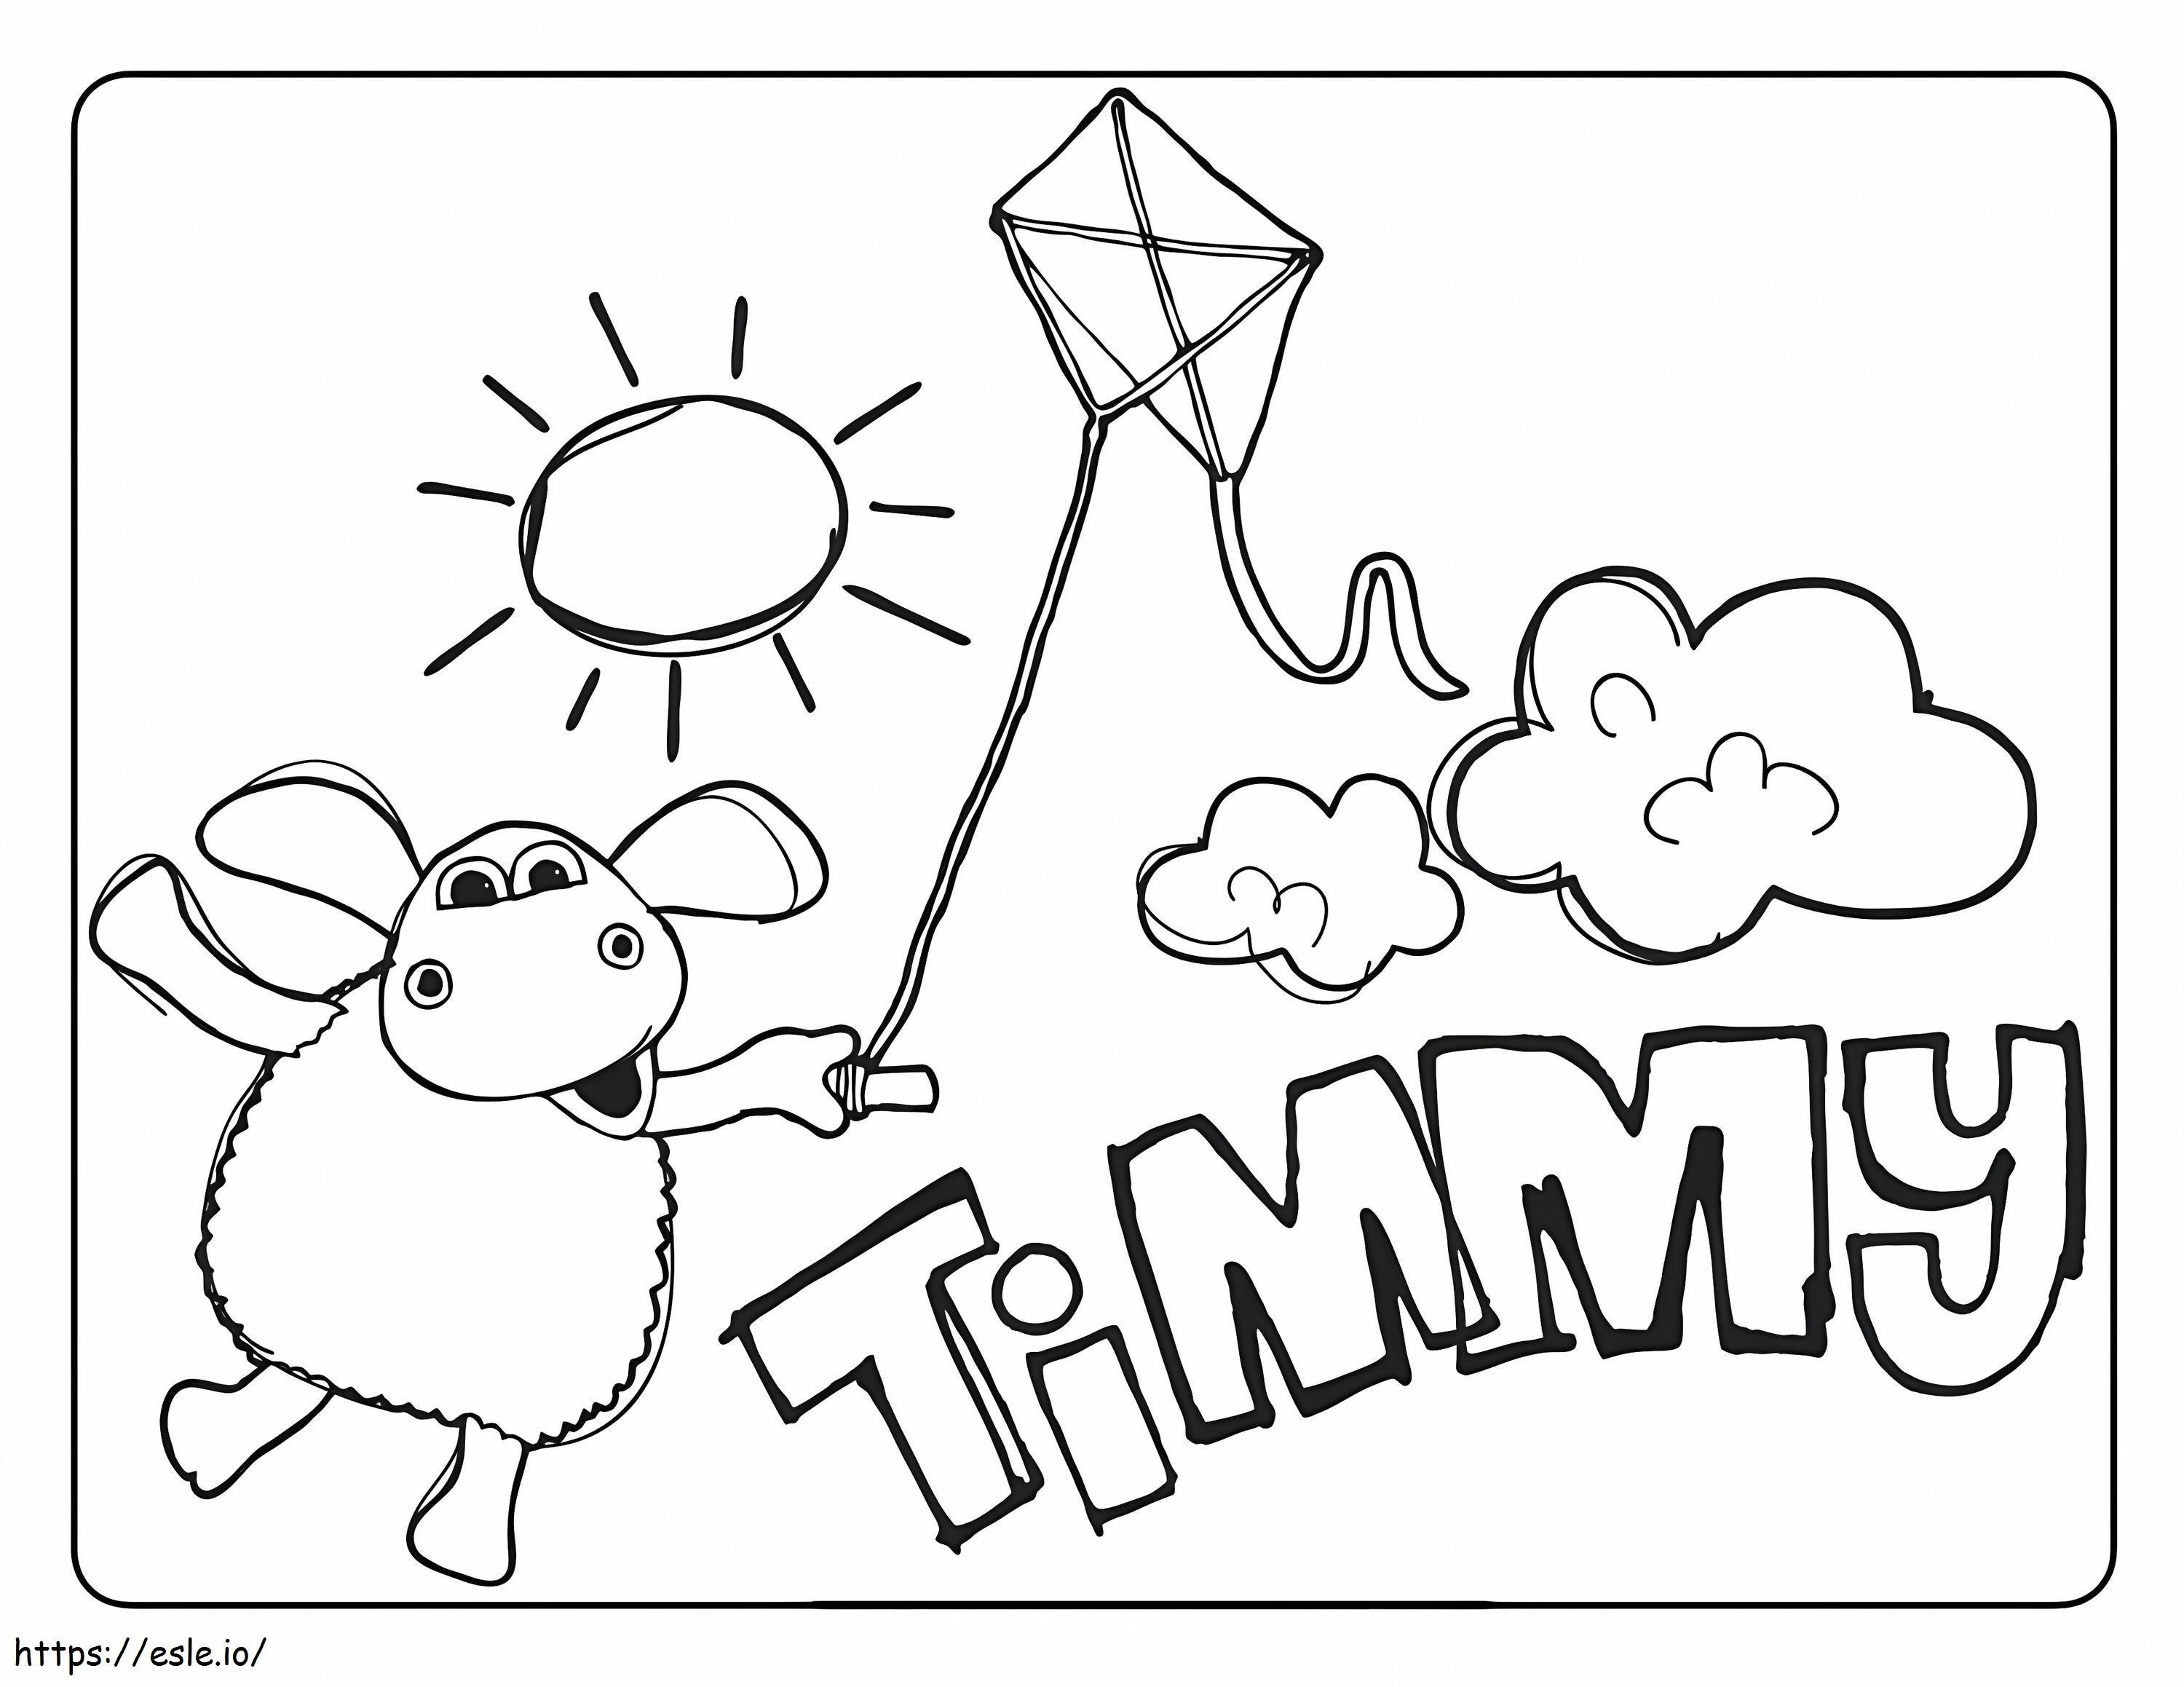 1583462028 Tt Timmy Kite coloring page